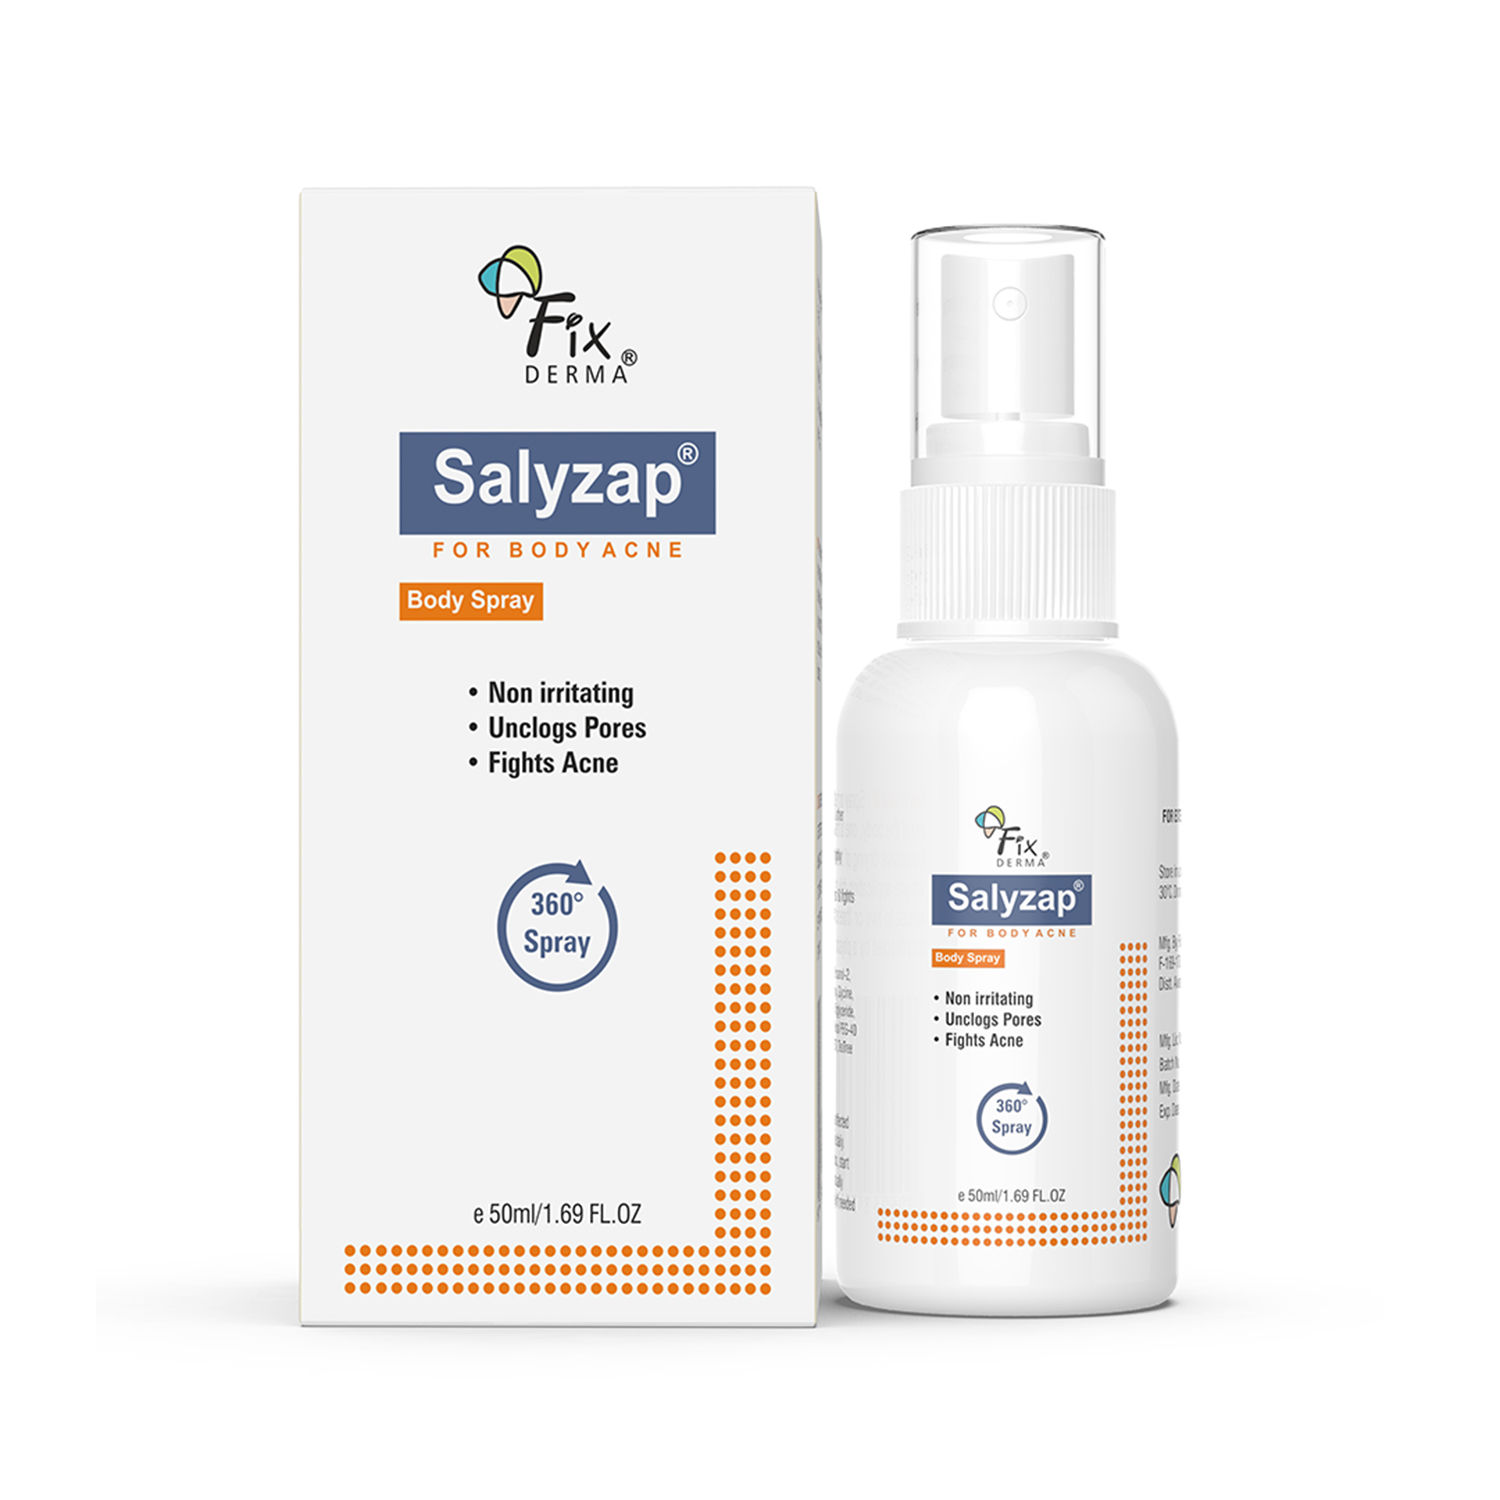 Buy Fixderma 2% Salicylic Acid Salyzap Body Acne Spray For Acne On Back, Shoulders, Neck & Chest,Body Acne Spray To Improve Breakouts & Uneven Skin Texture For Women & Men - 50ml - Purplle